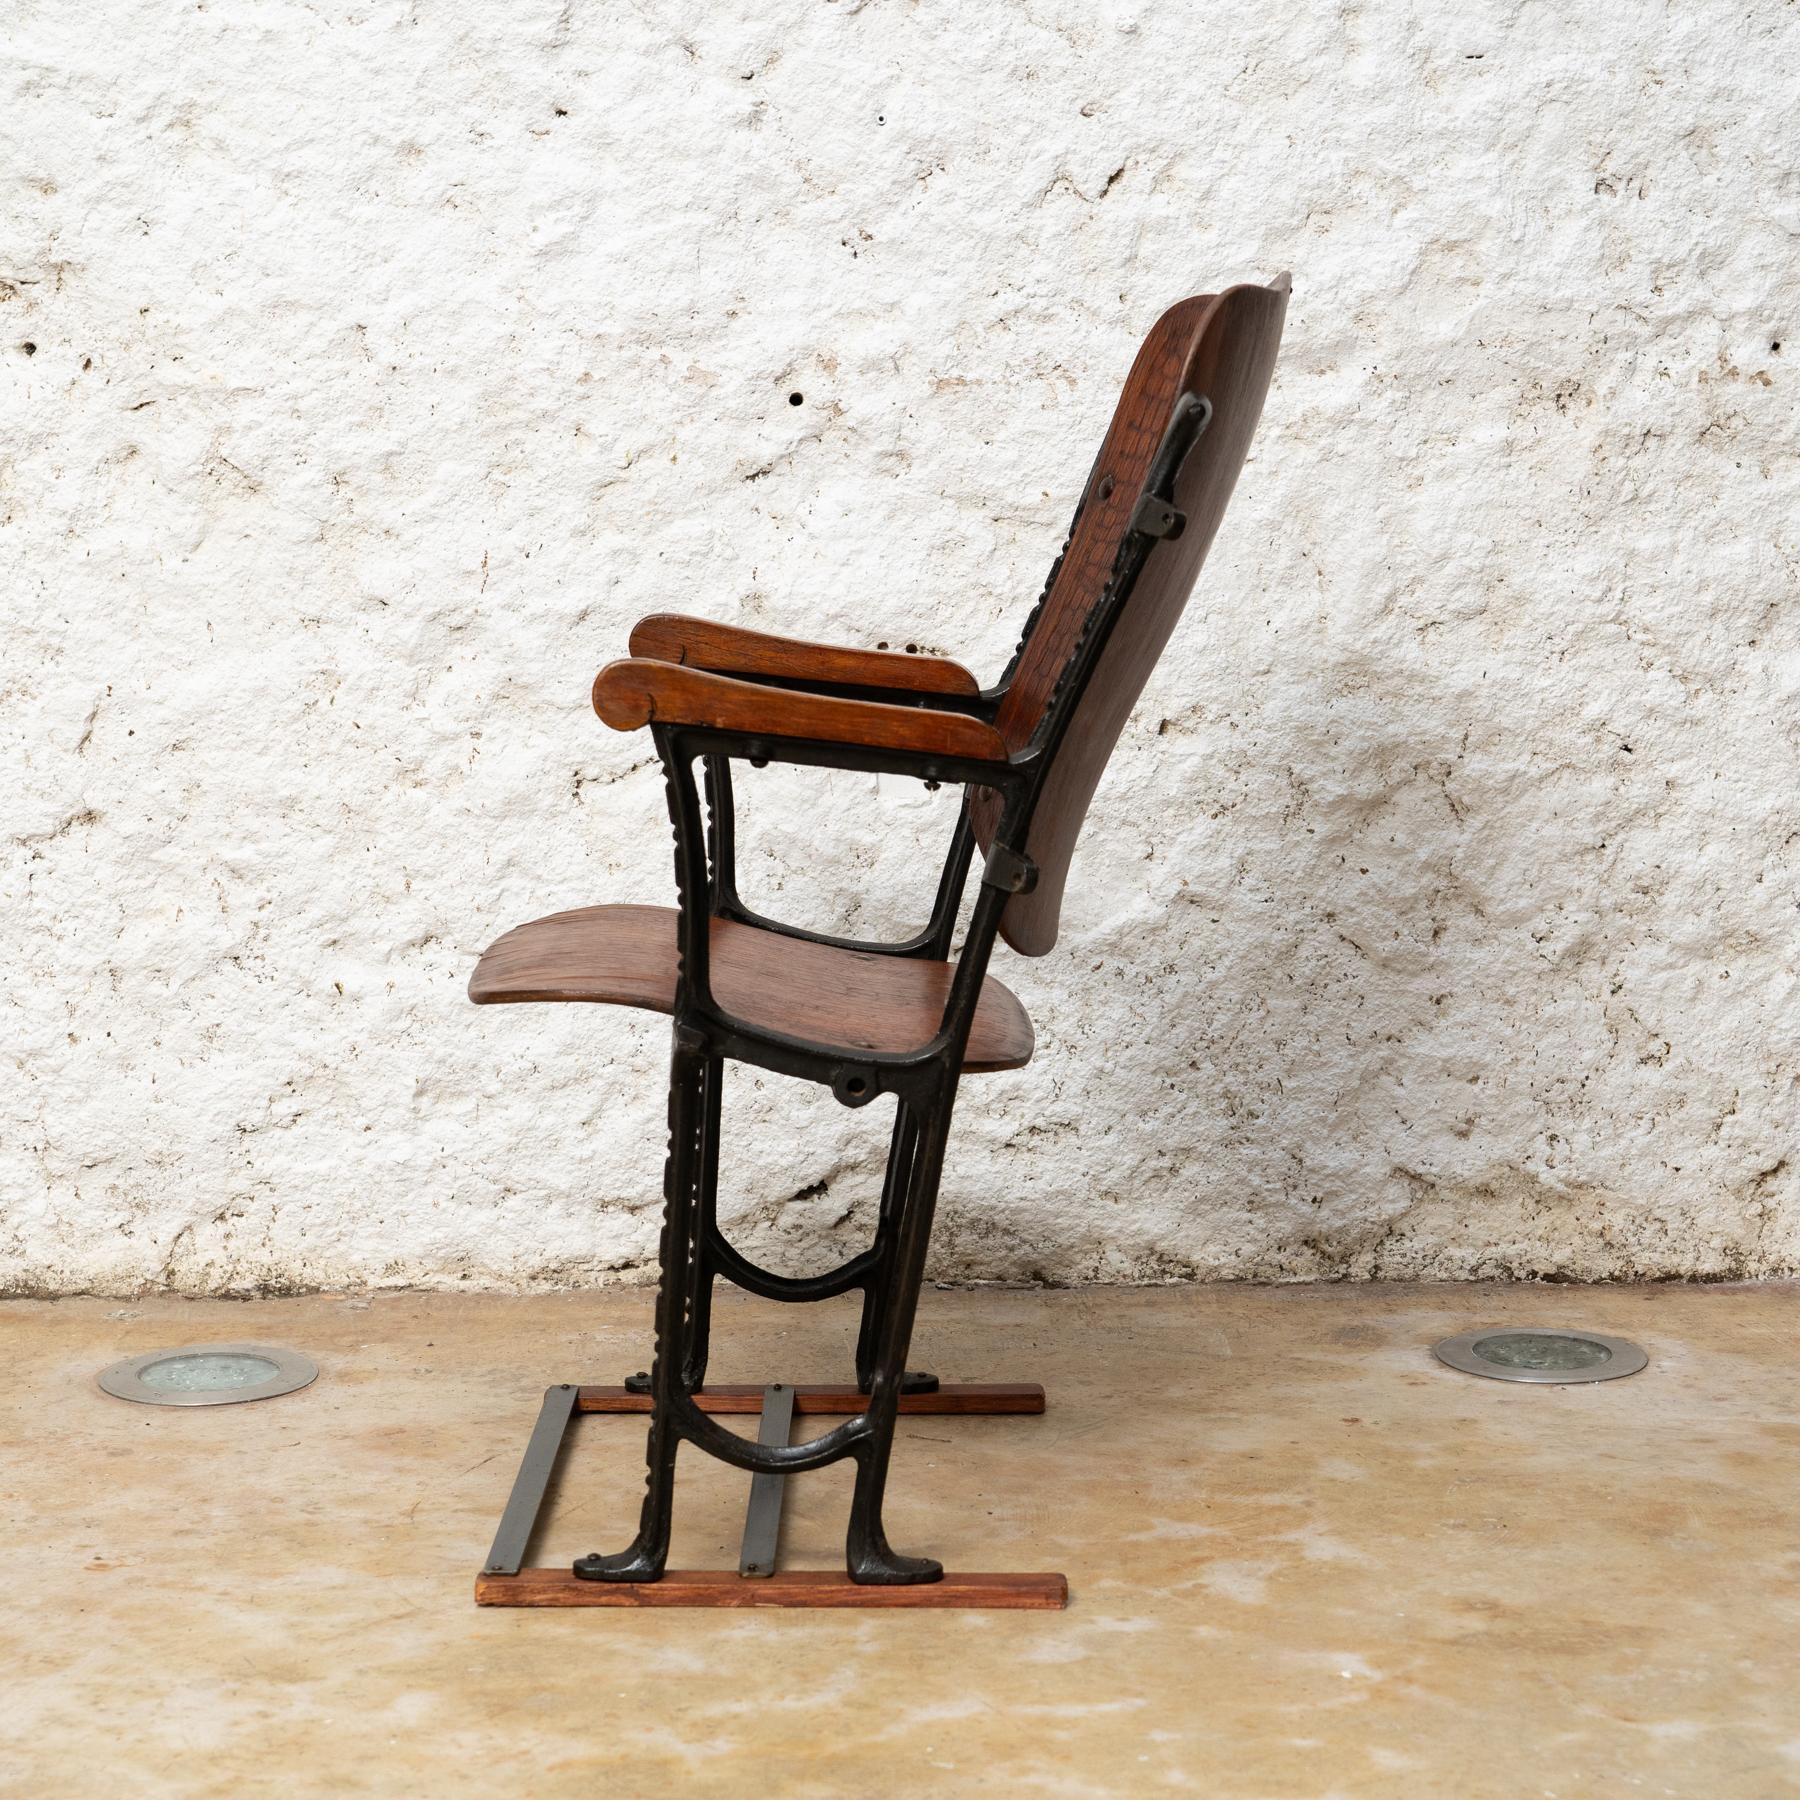 Mid-20th Century Elegance in Time: Catalan Modernism Theater Chair 'Kursaal', c. 1930 For Sale